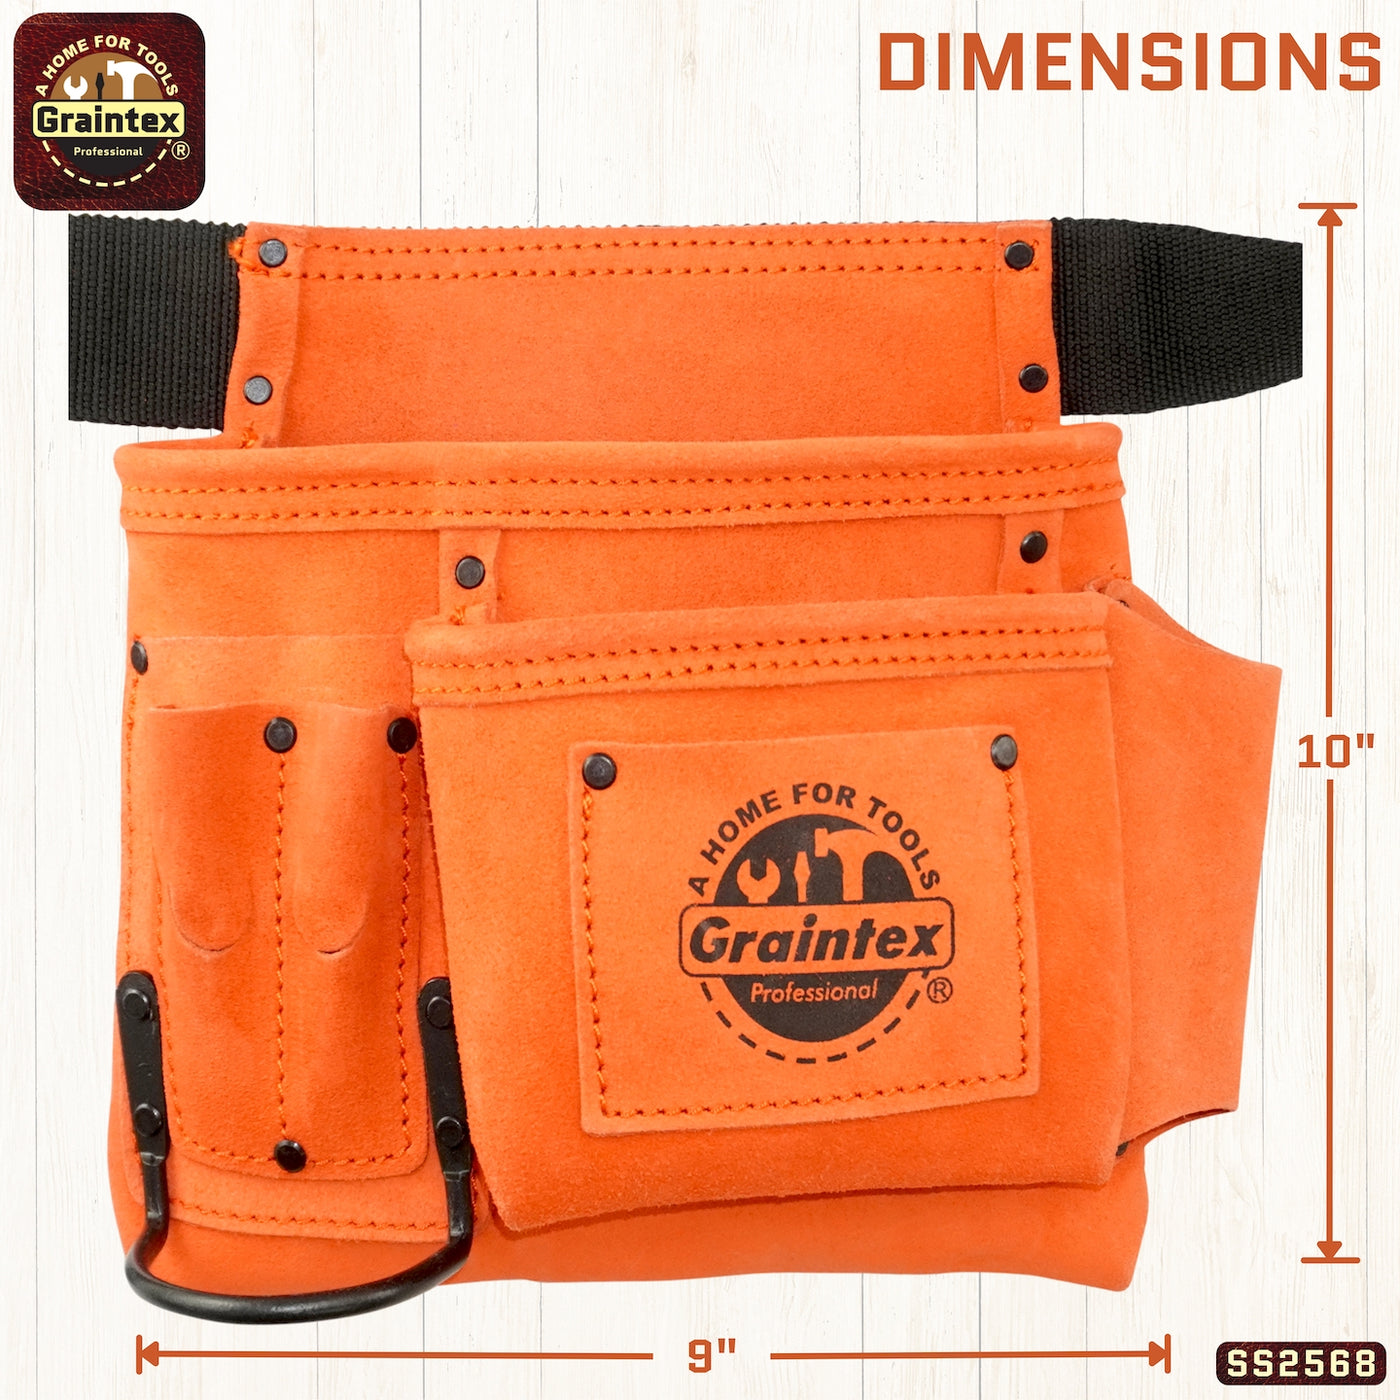 SS2568 :: 5 Pocket Nail & Tool Pouch Lime Orange Color Suede Leather with Belt